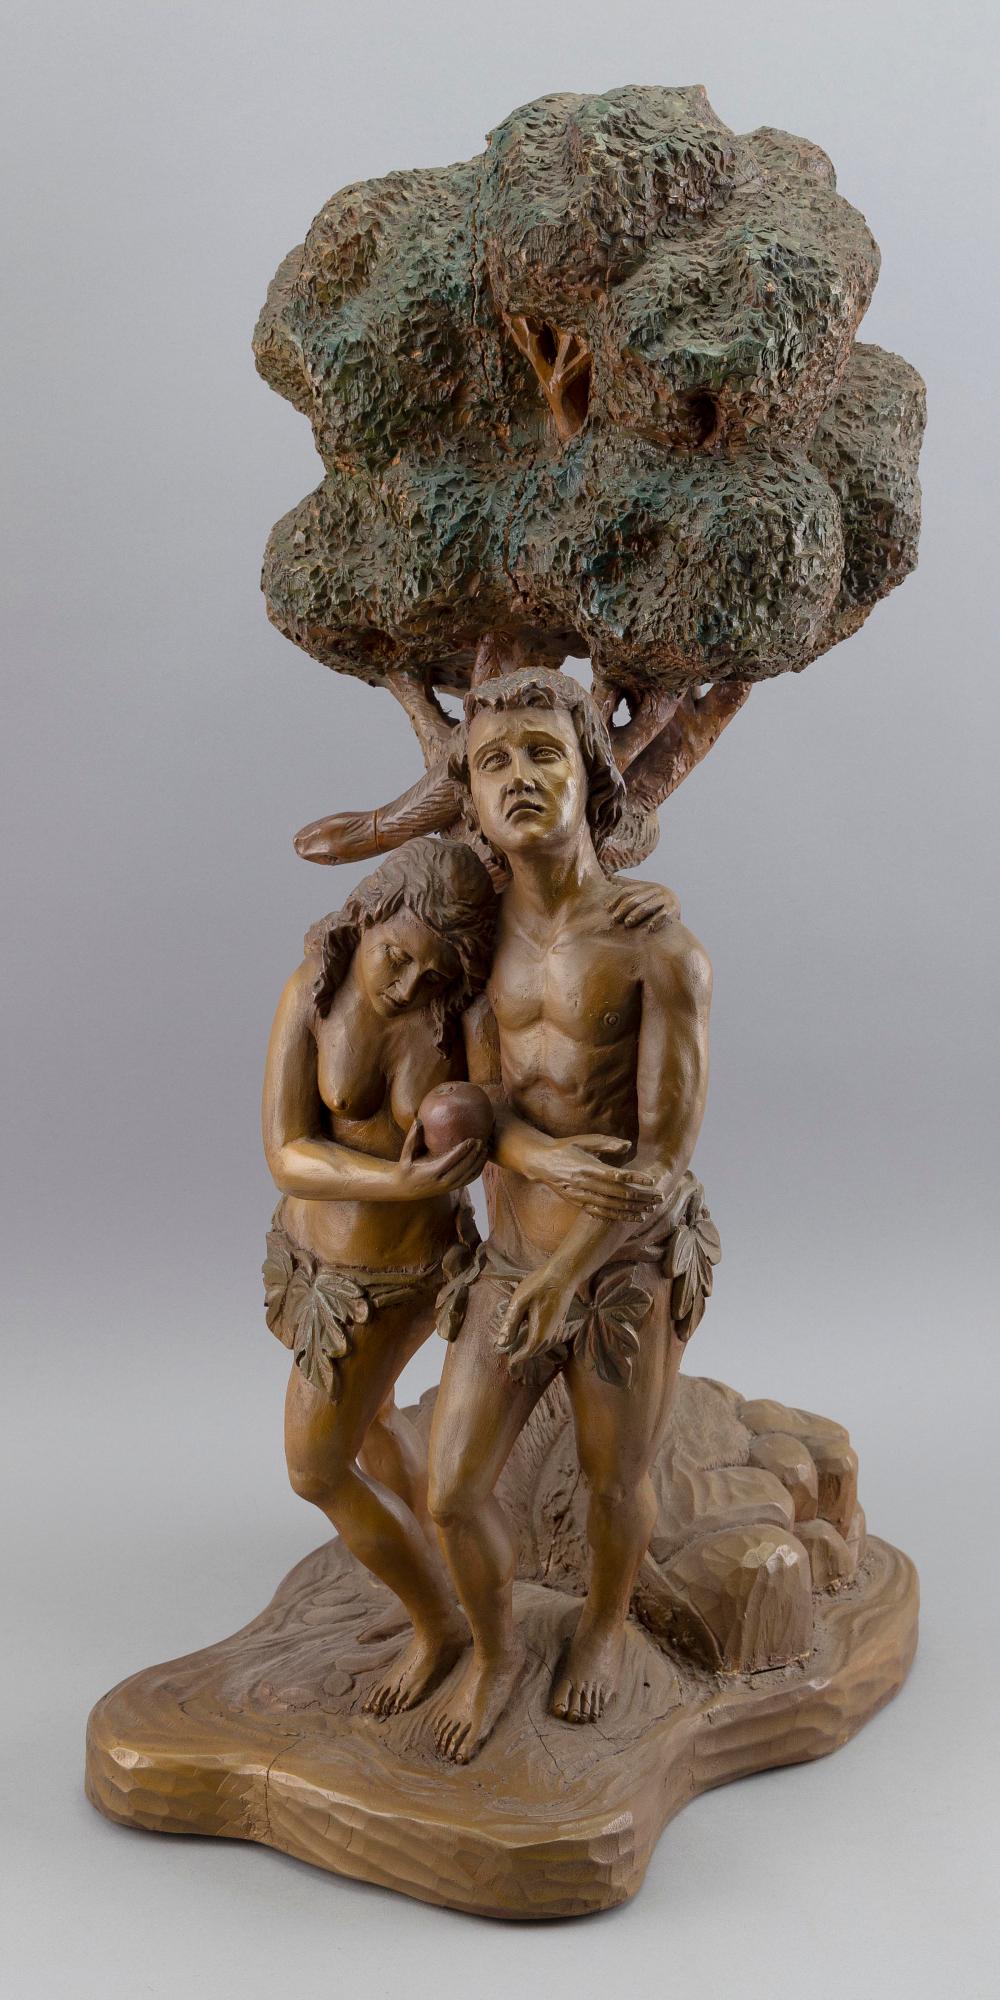 EXCEPTIONAL POLYCHROME WOOD SCULPTURE